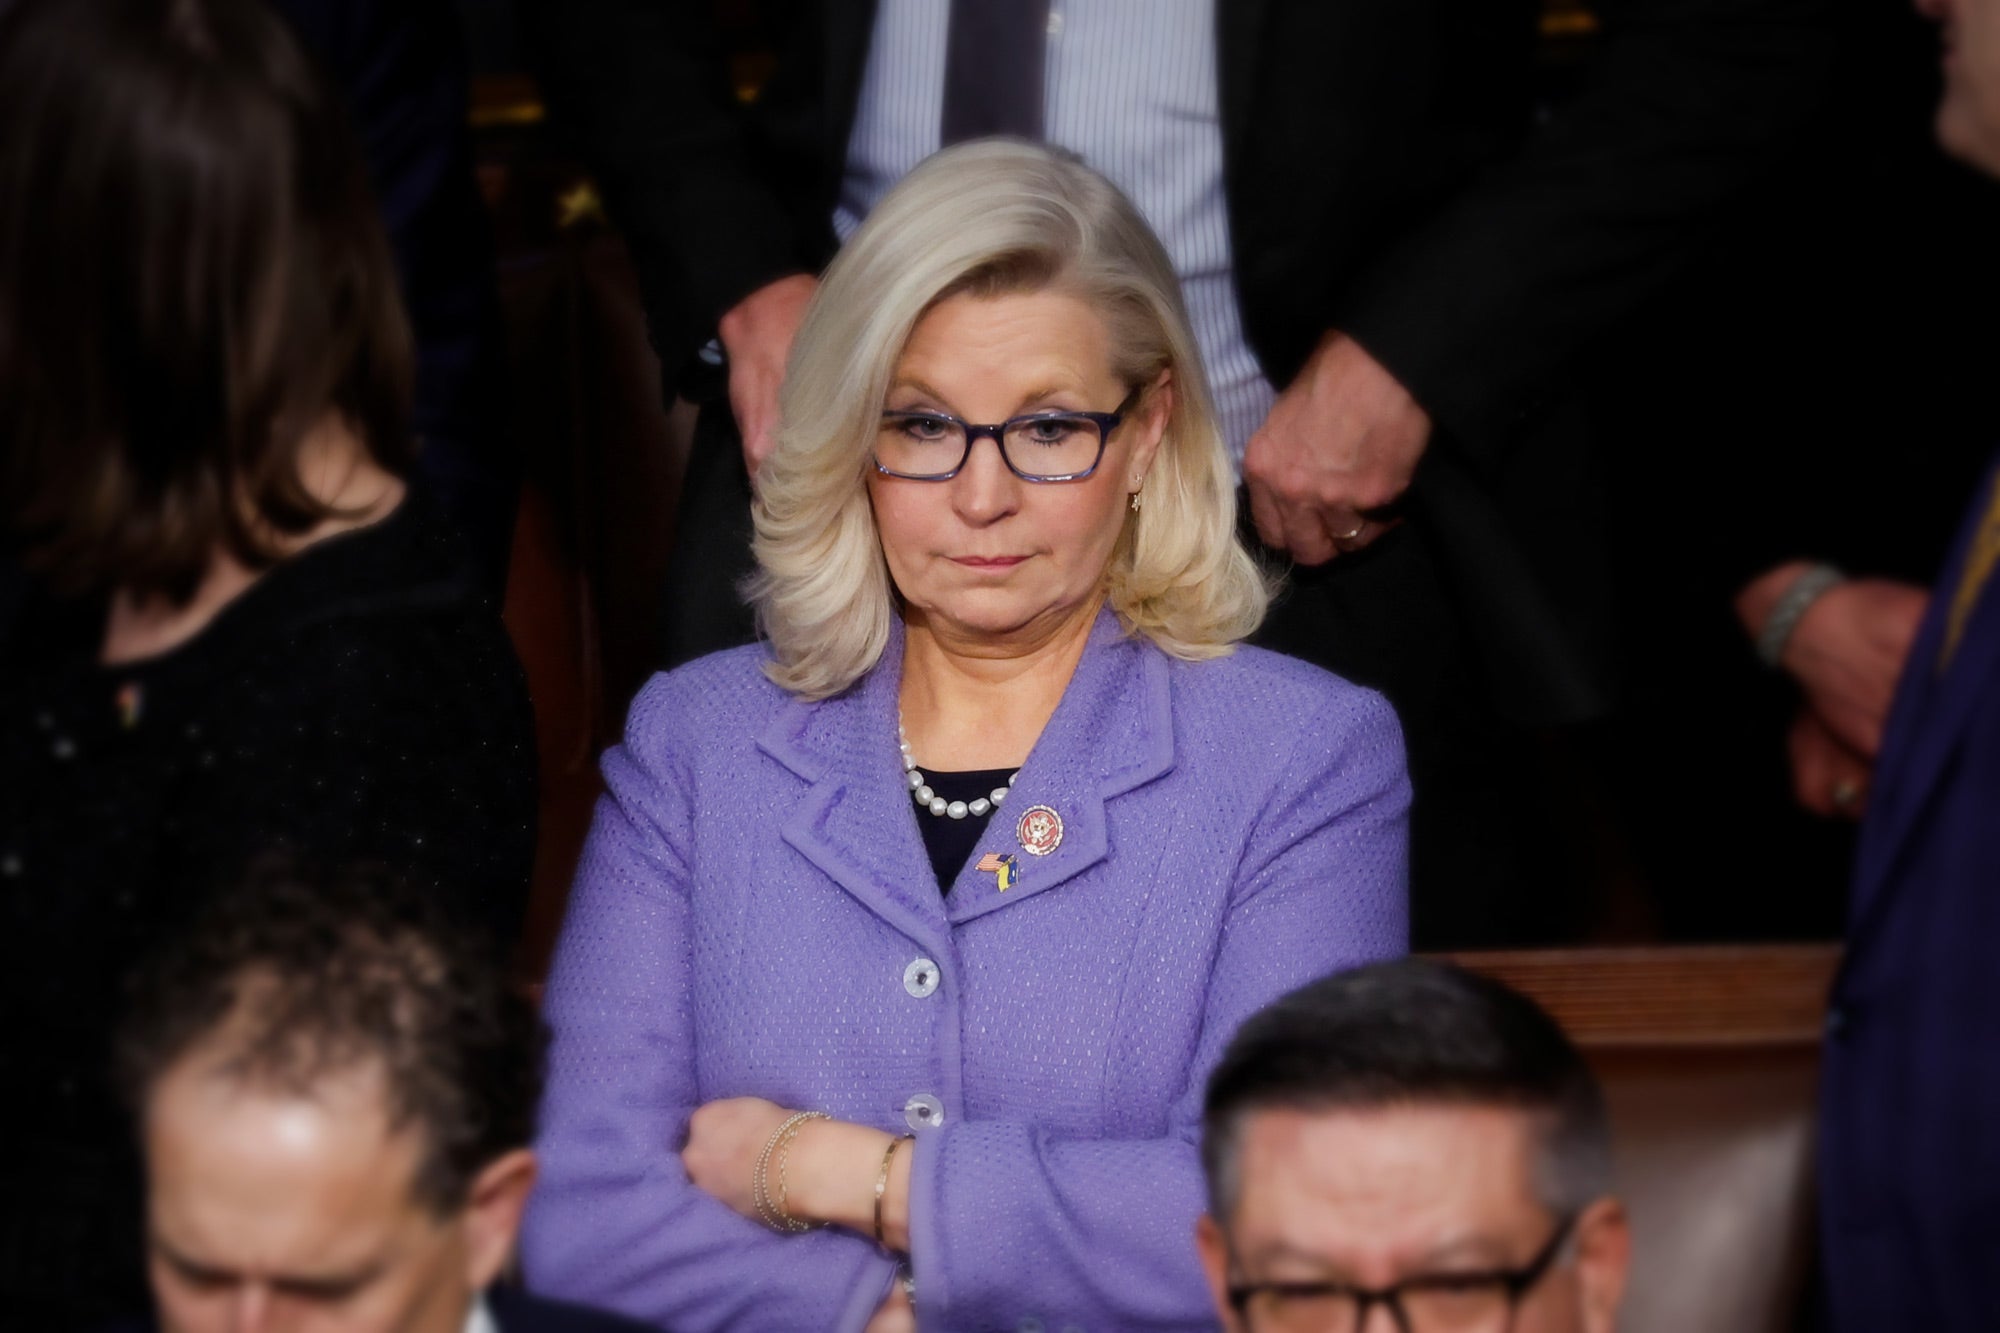 Liz Cheney, wearing lavender, looking on disapprovingly in a crowd of suited men.